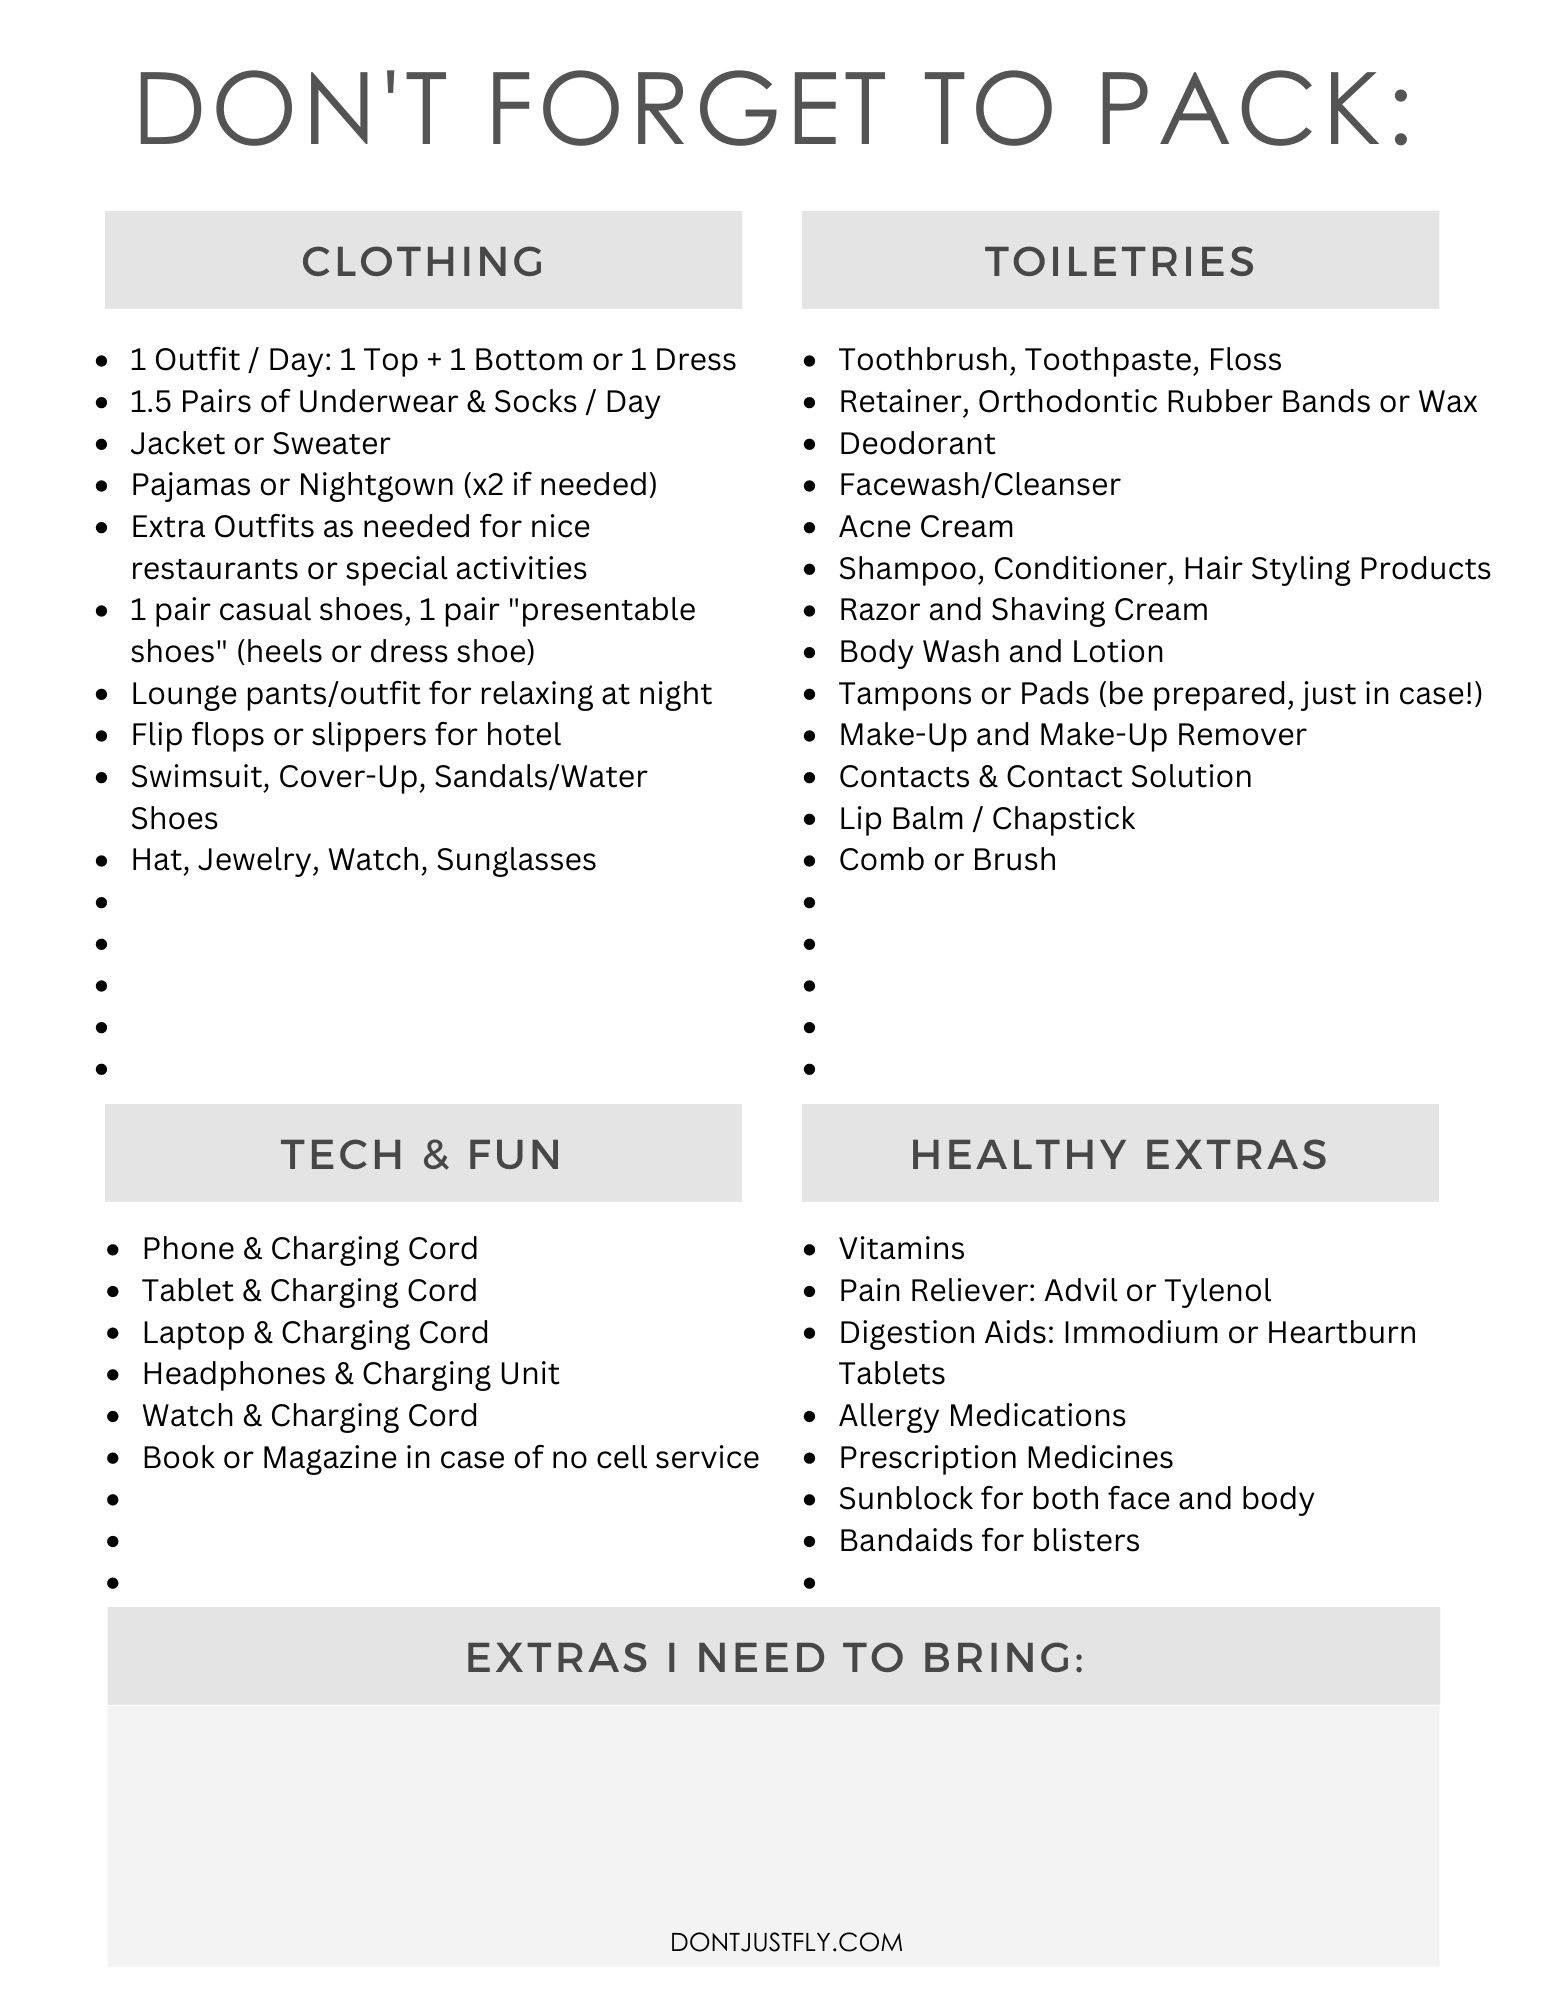 The image shows a preview of the printable packing list for teenage girls.